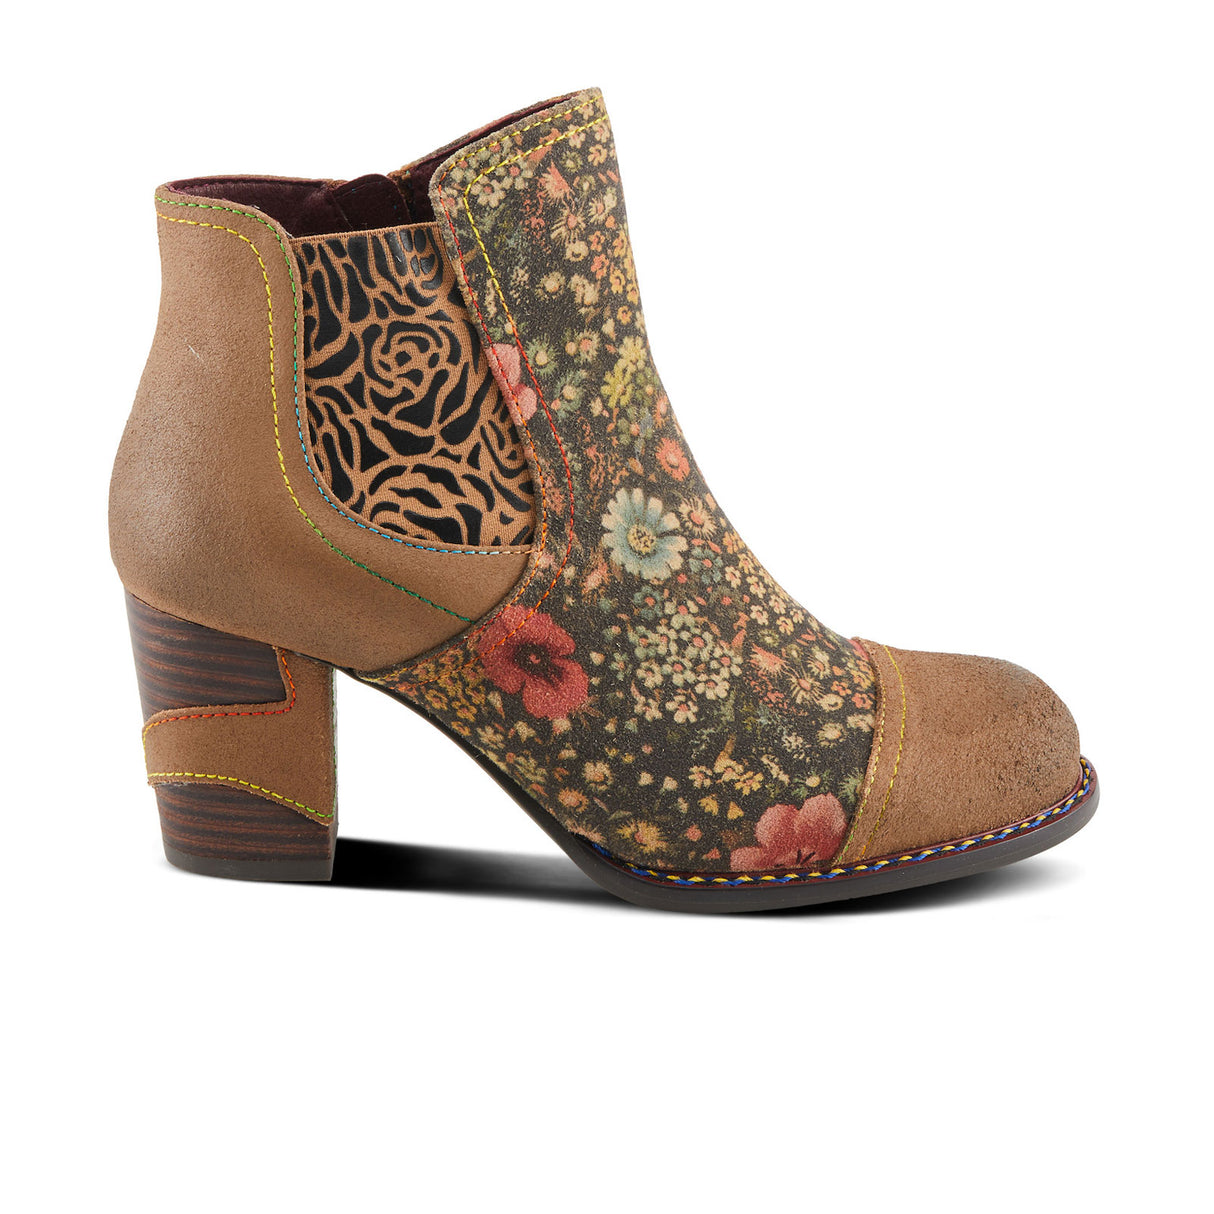 L'Artiste Melvina Ankle Boot (Women) - Brown Multi Boots - Fashion - Ankle Boot - The Heel Shoe Fitters